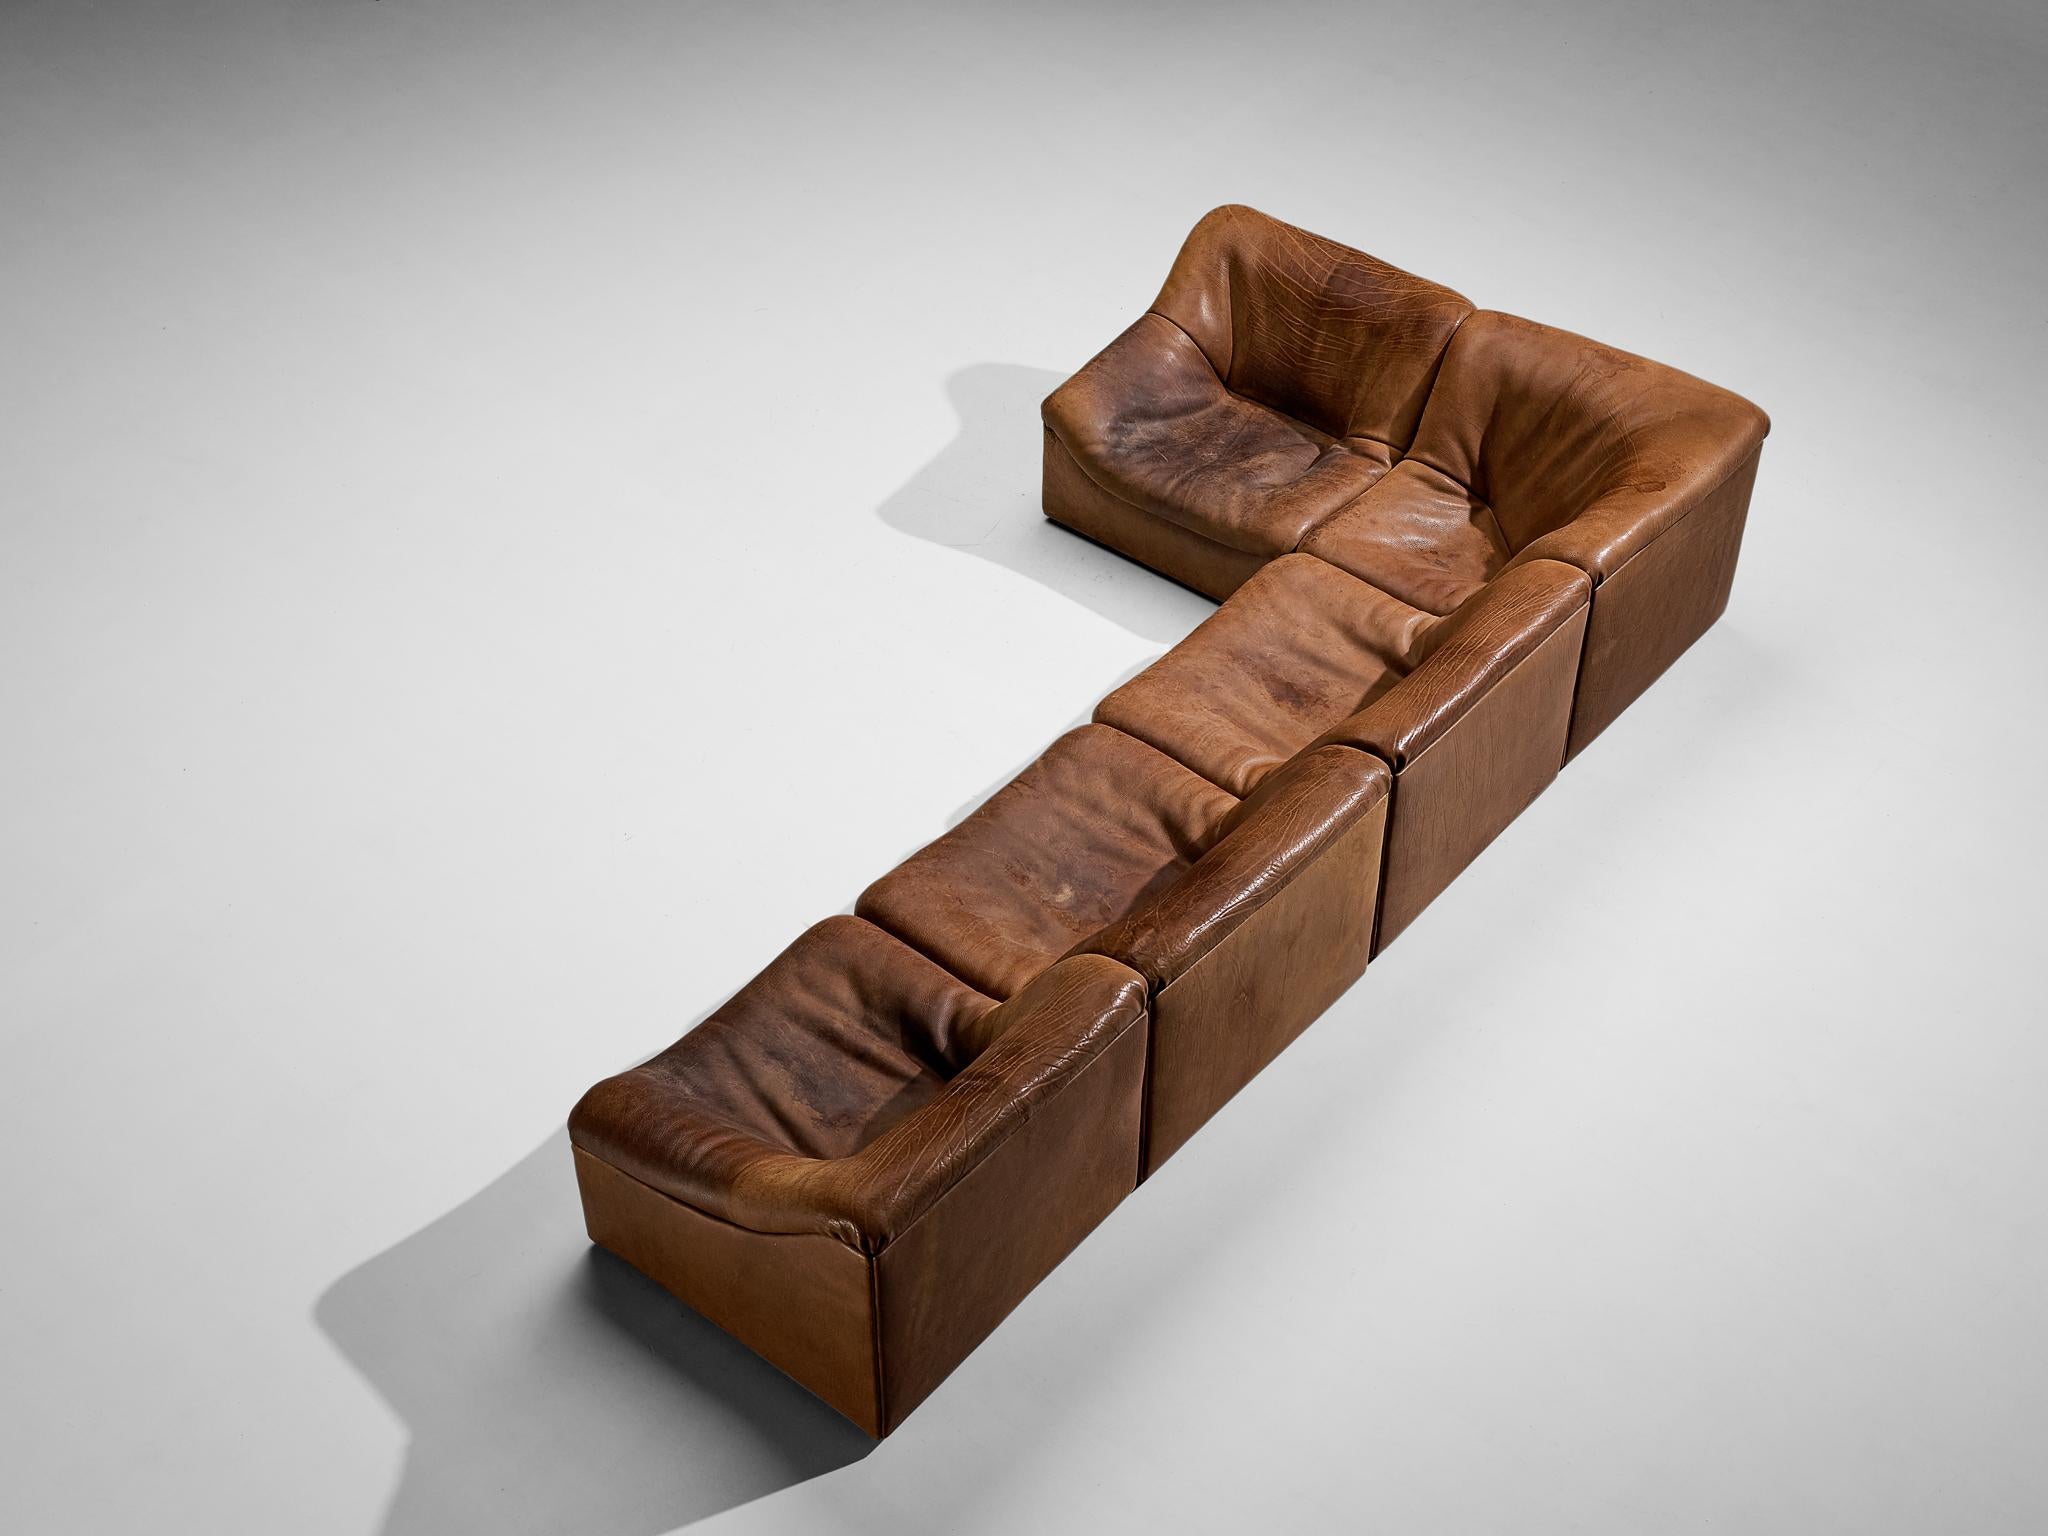 De Sede, 'DS 46' sectional sofa, heavily patinated cognac buffalo leather, Switzerland, 1970s.

Comfortable modular sectional sofa consisting of five elements in thick buffalo leather by De Sede. This model features a solid base with a rounded,